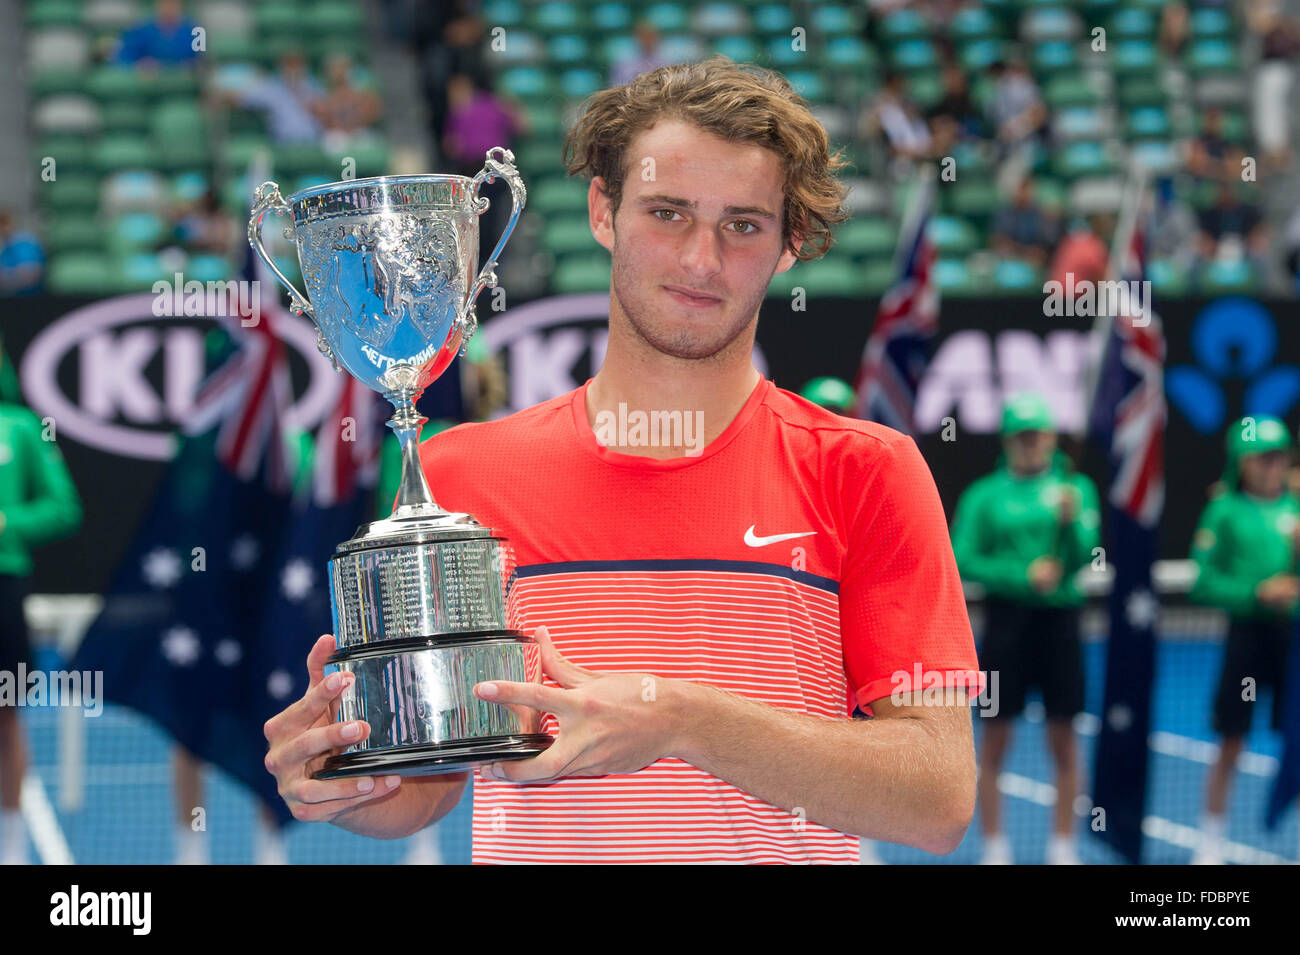 Melbourne, 30th Jan, 2016. Oliver Anderson of Australia poses during the award ceremony after the junior boys' singles final match against Jurabeck Karimov of Uzbekistan at the Australian Open Tennis Championships